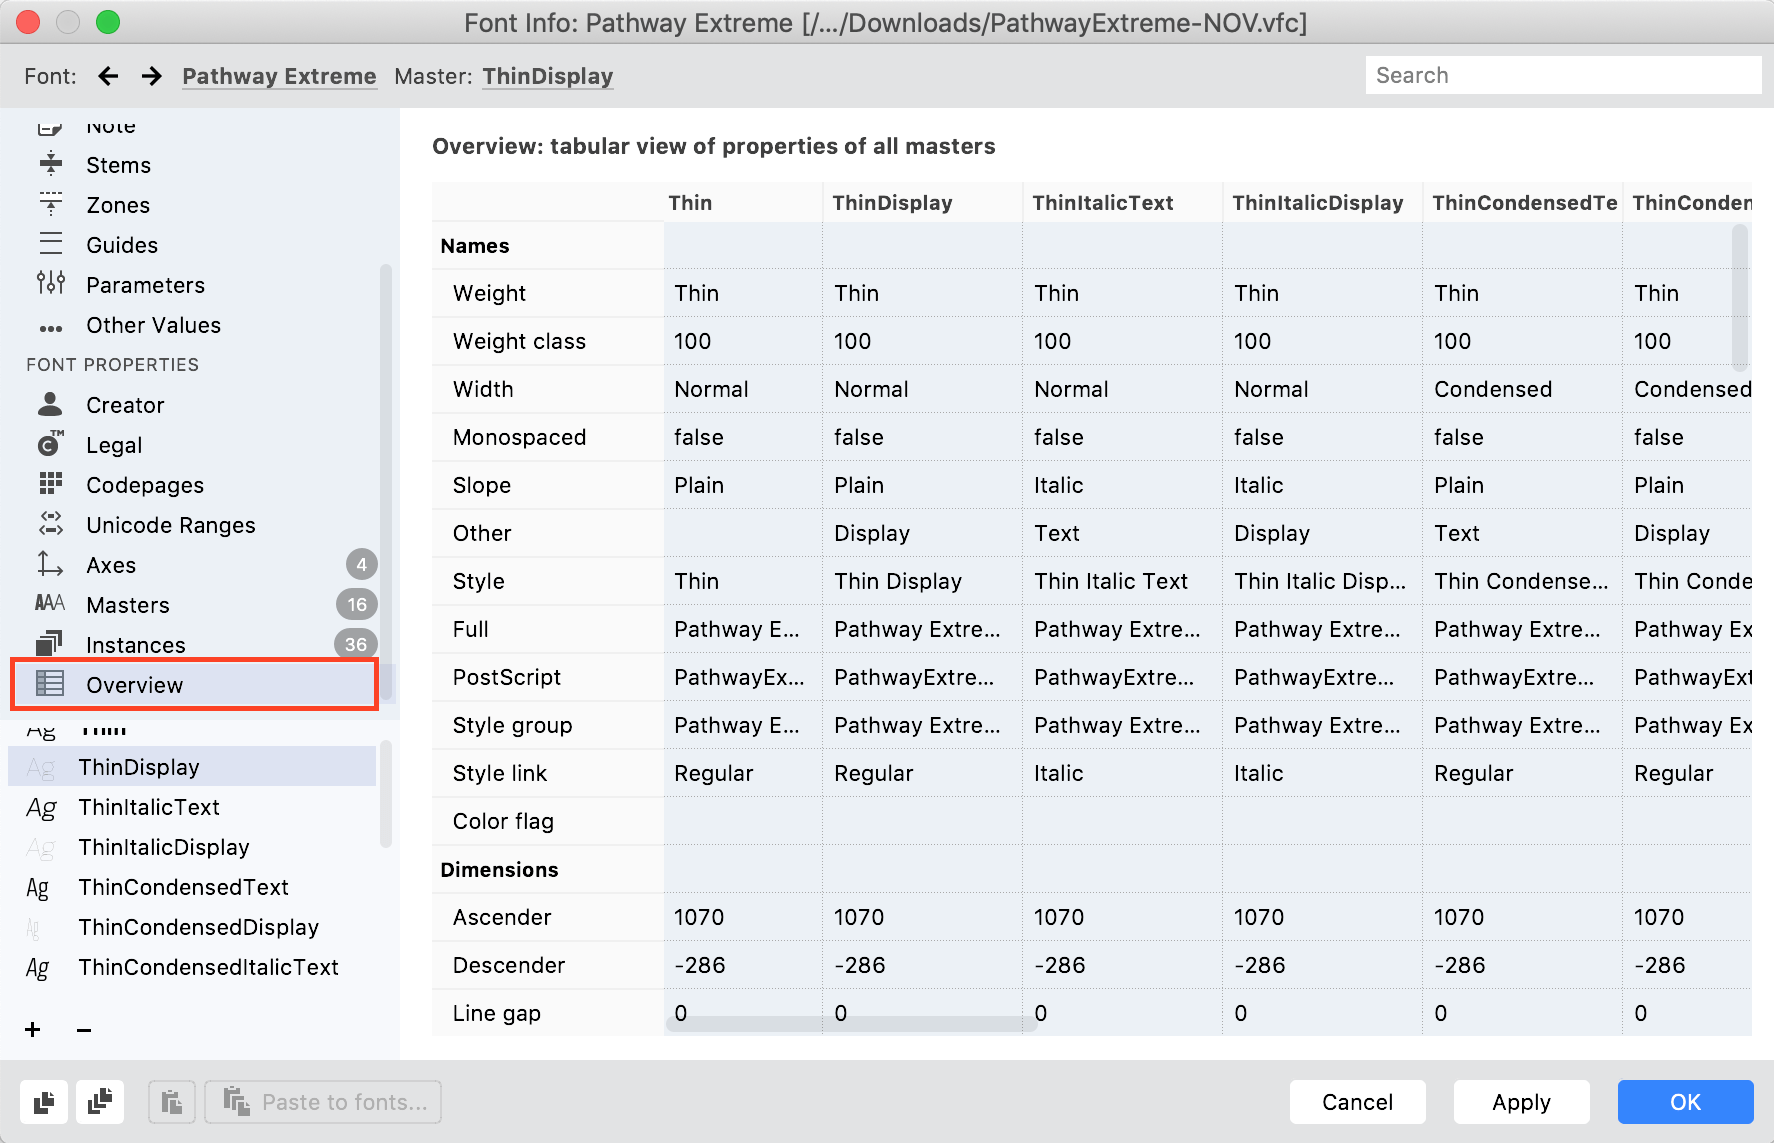 Copy-paste and edit Font Info in Overview page